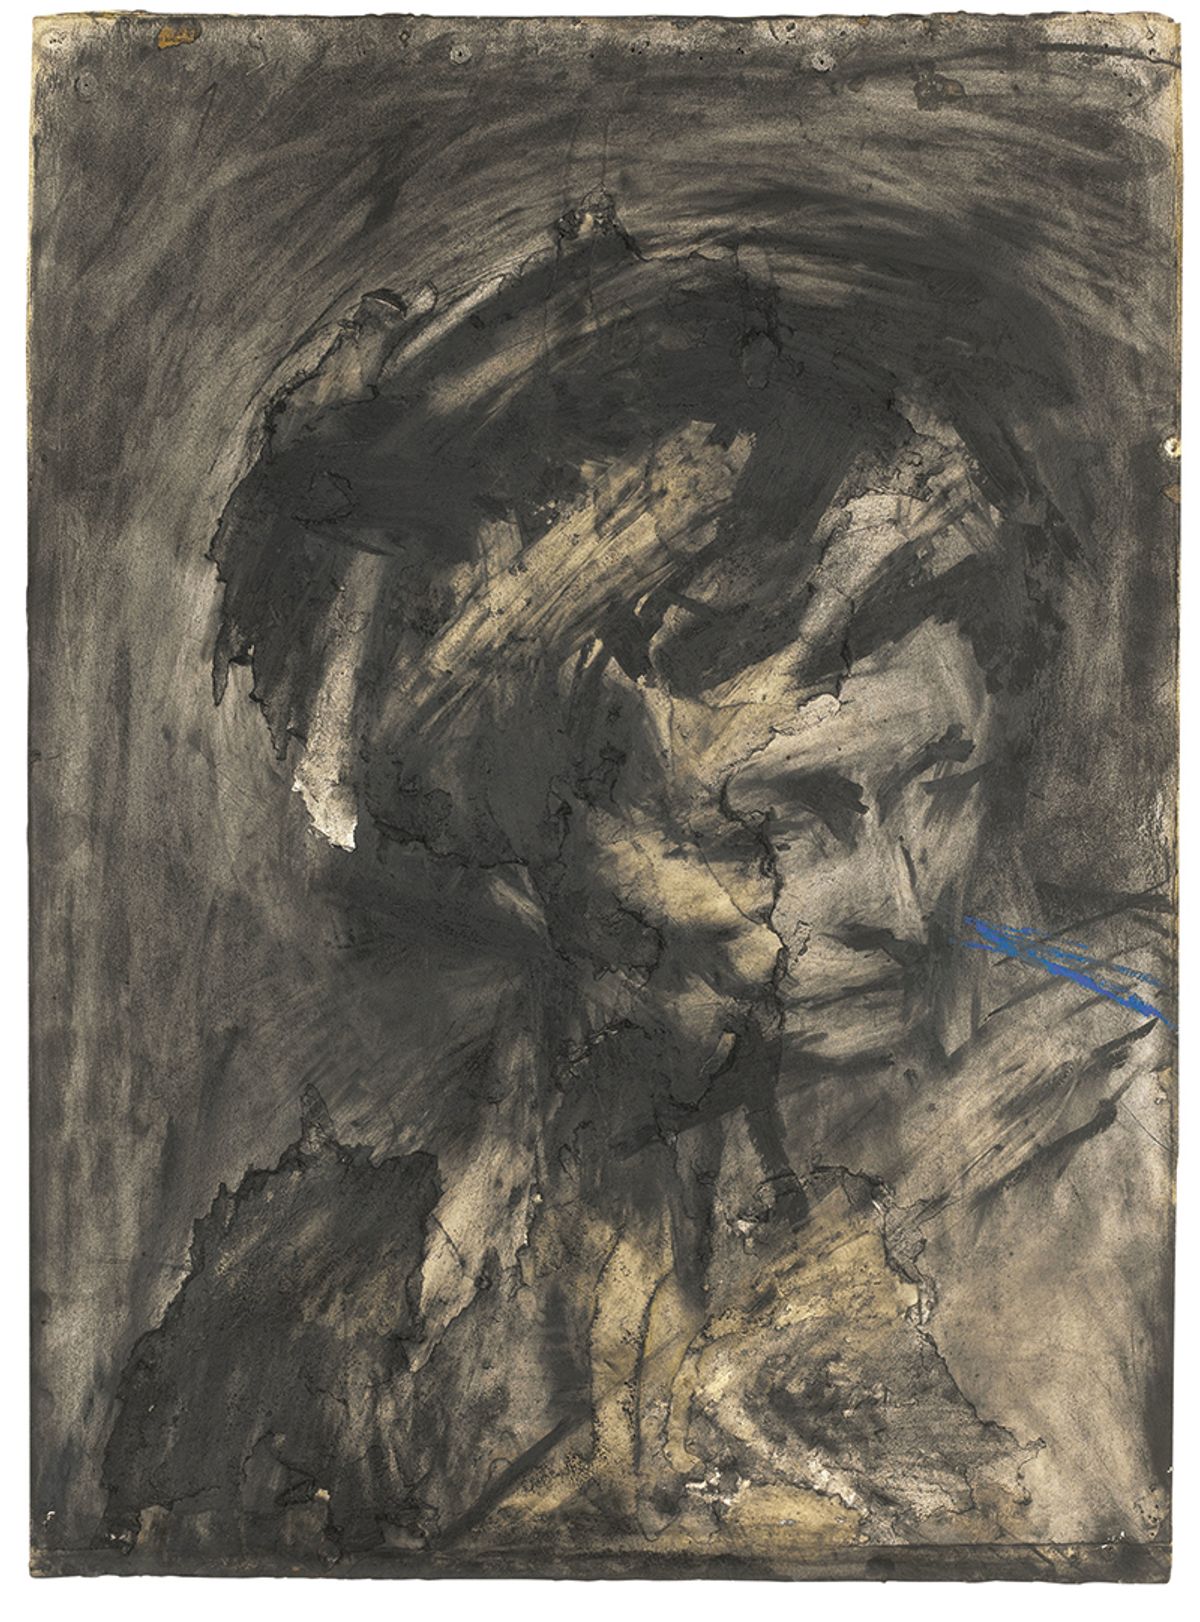 Frank Auerbach’s 1961 drawing of his cousin Gerda Boehm, who was the only relative he saw again after the Second World War © The artist; courtesy of Frankie Rossi Art Projects; London